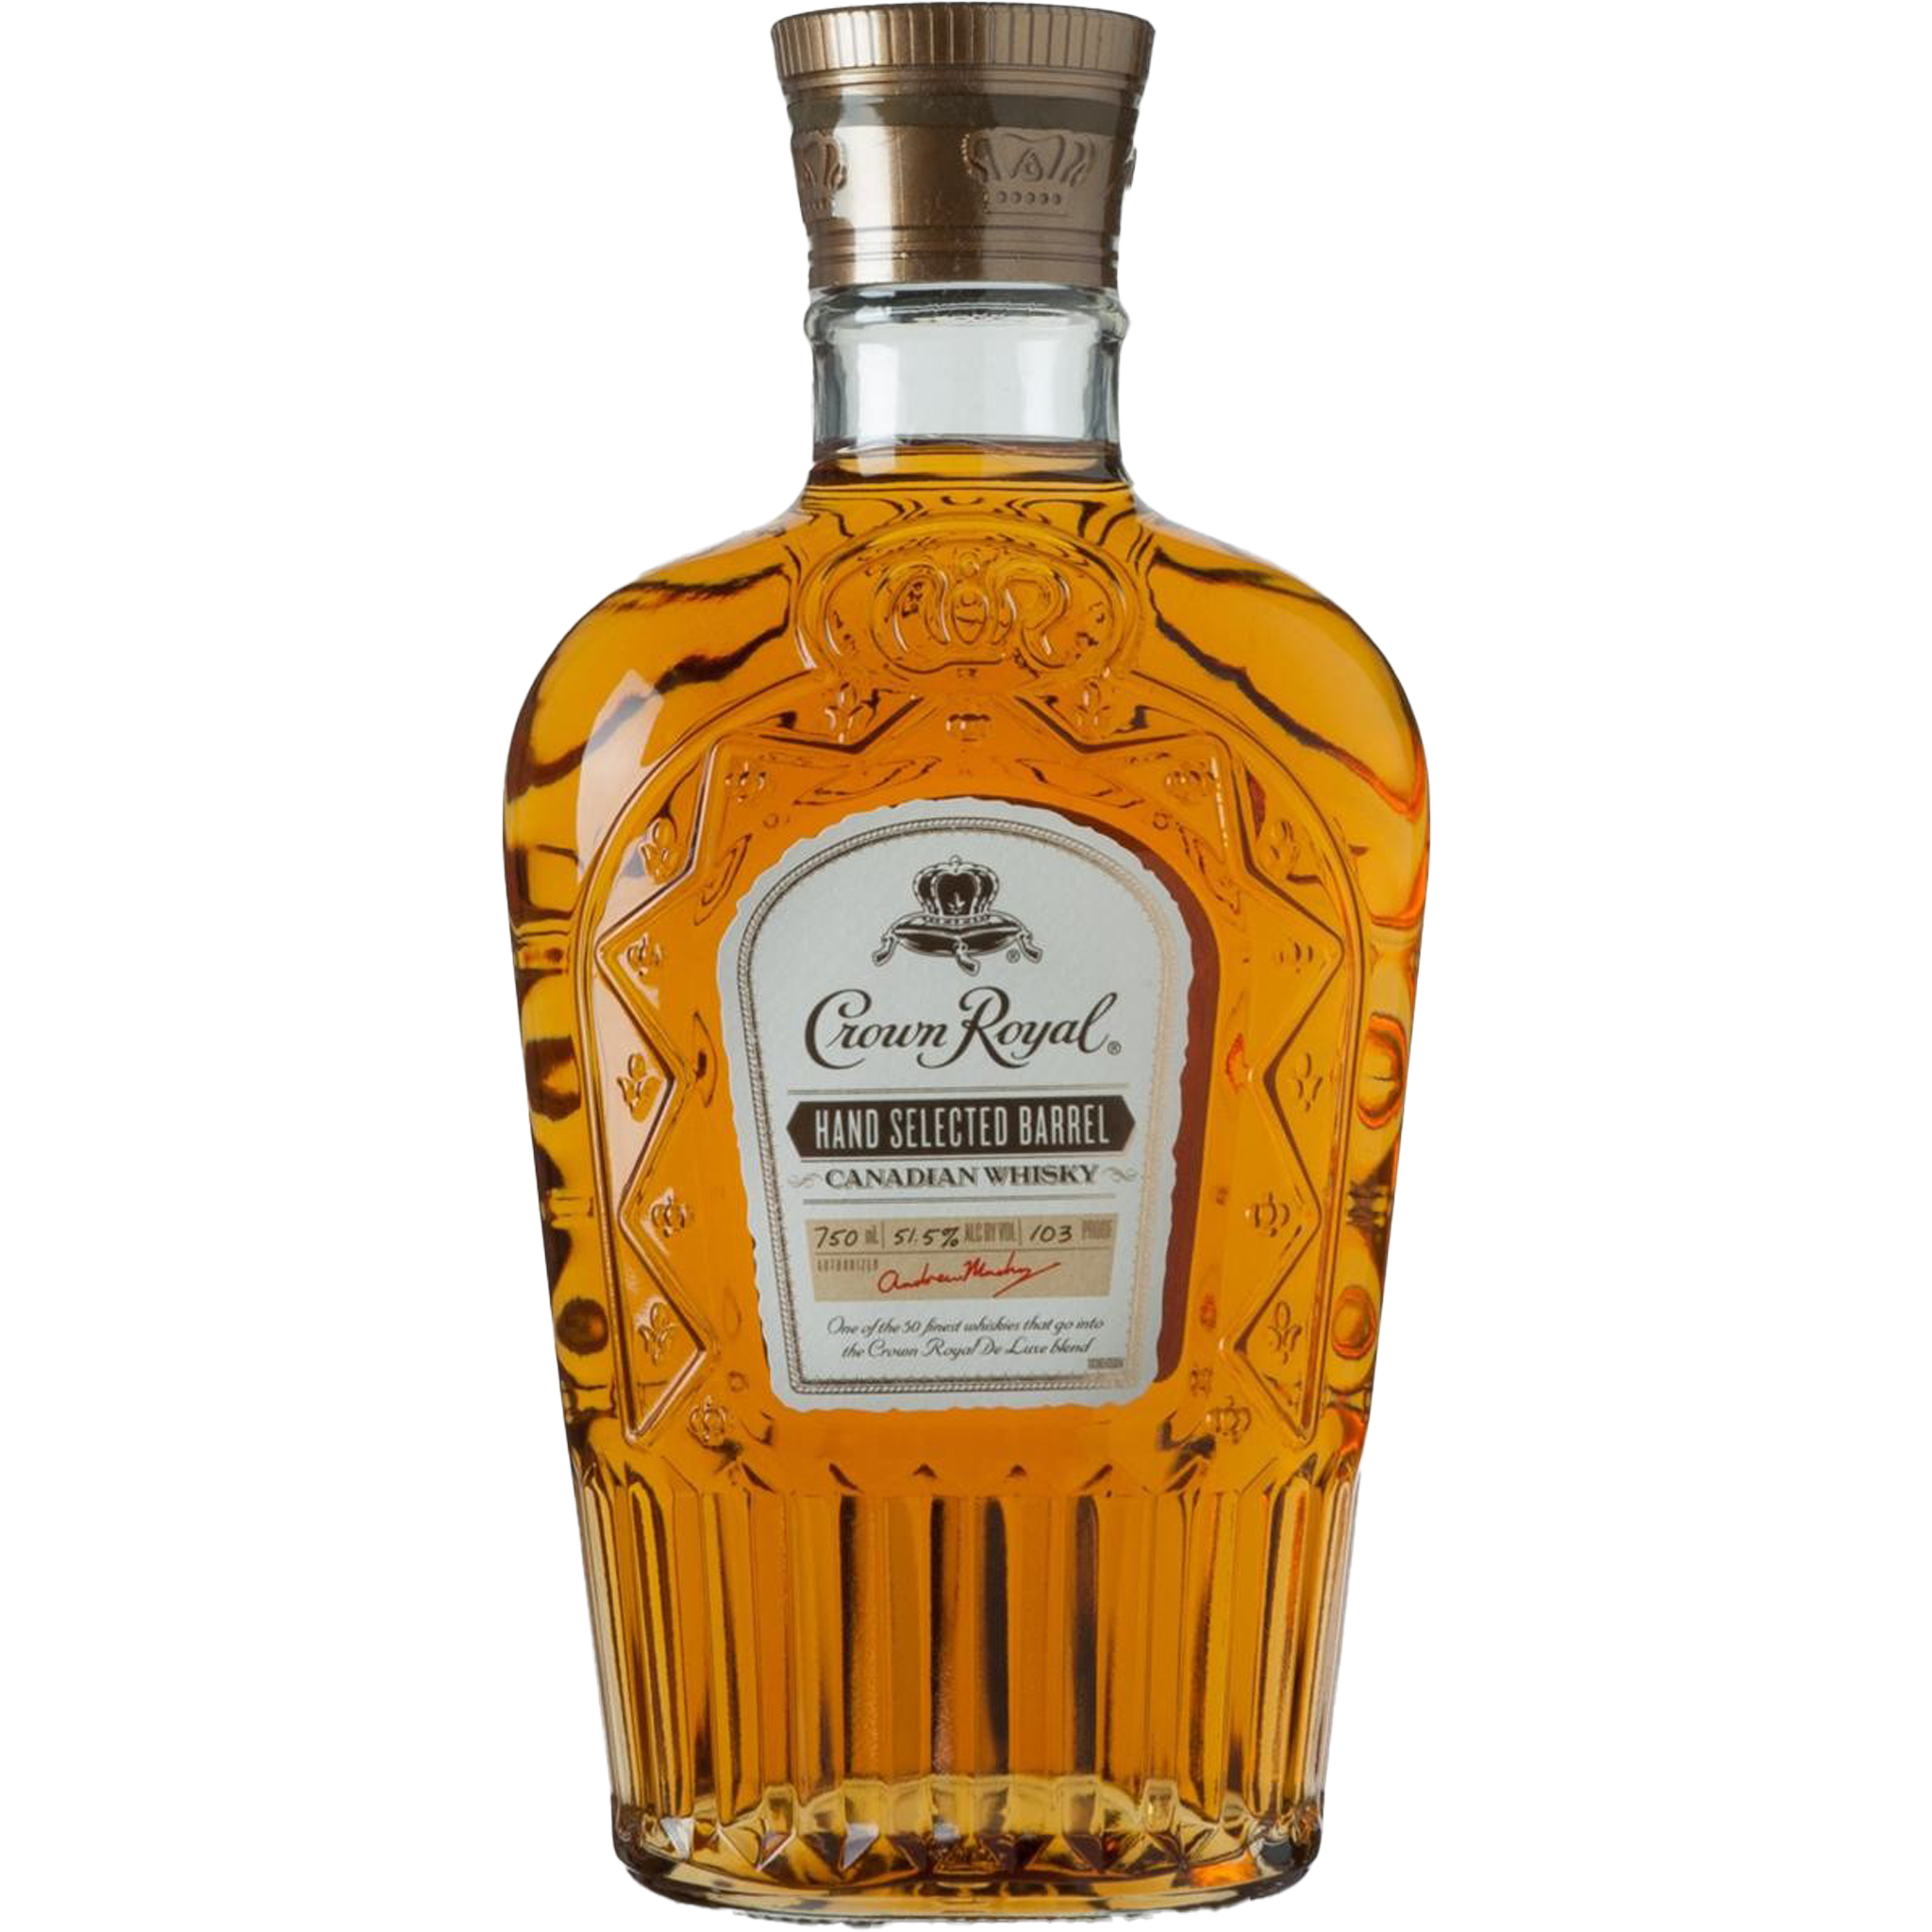 Crown Royal Hand Selected Barrel Canadian Whisky